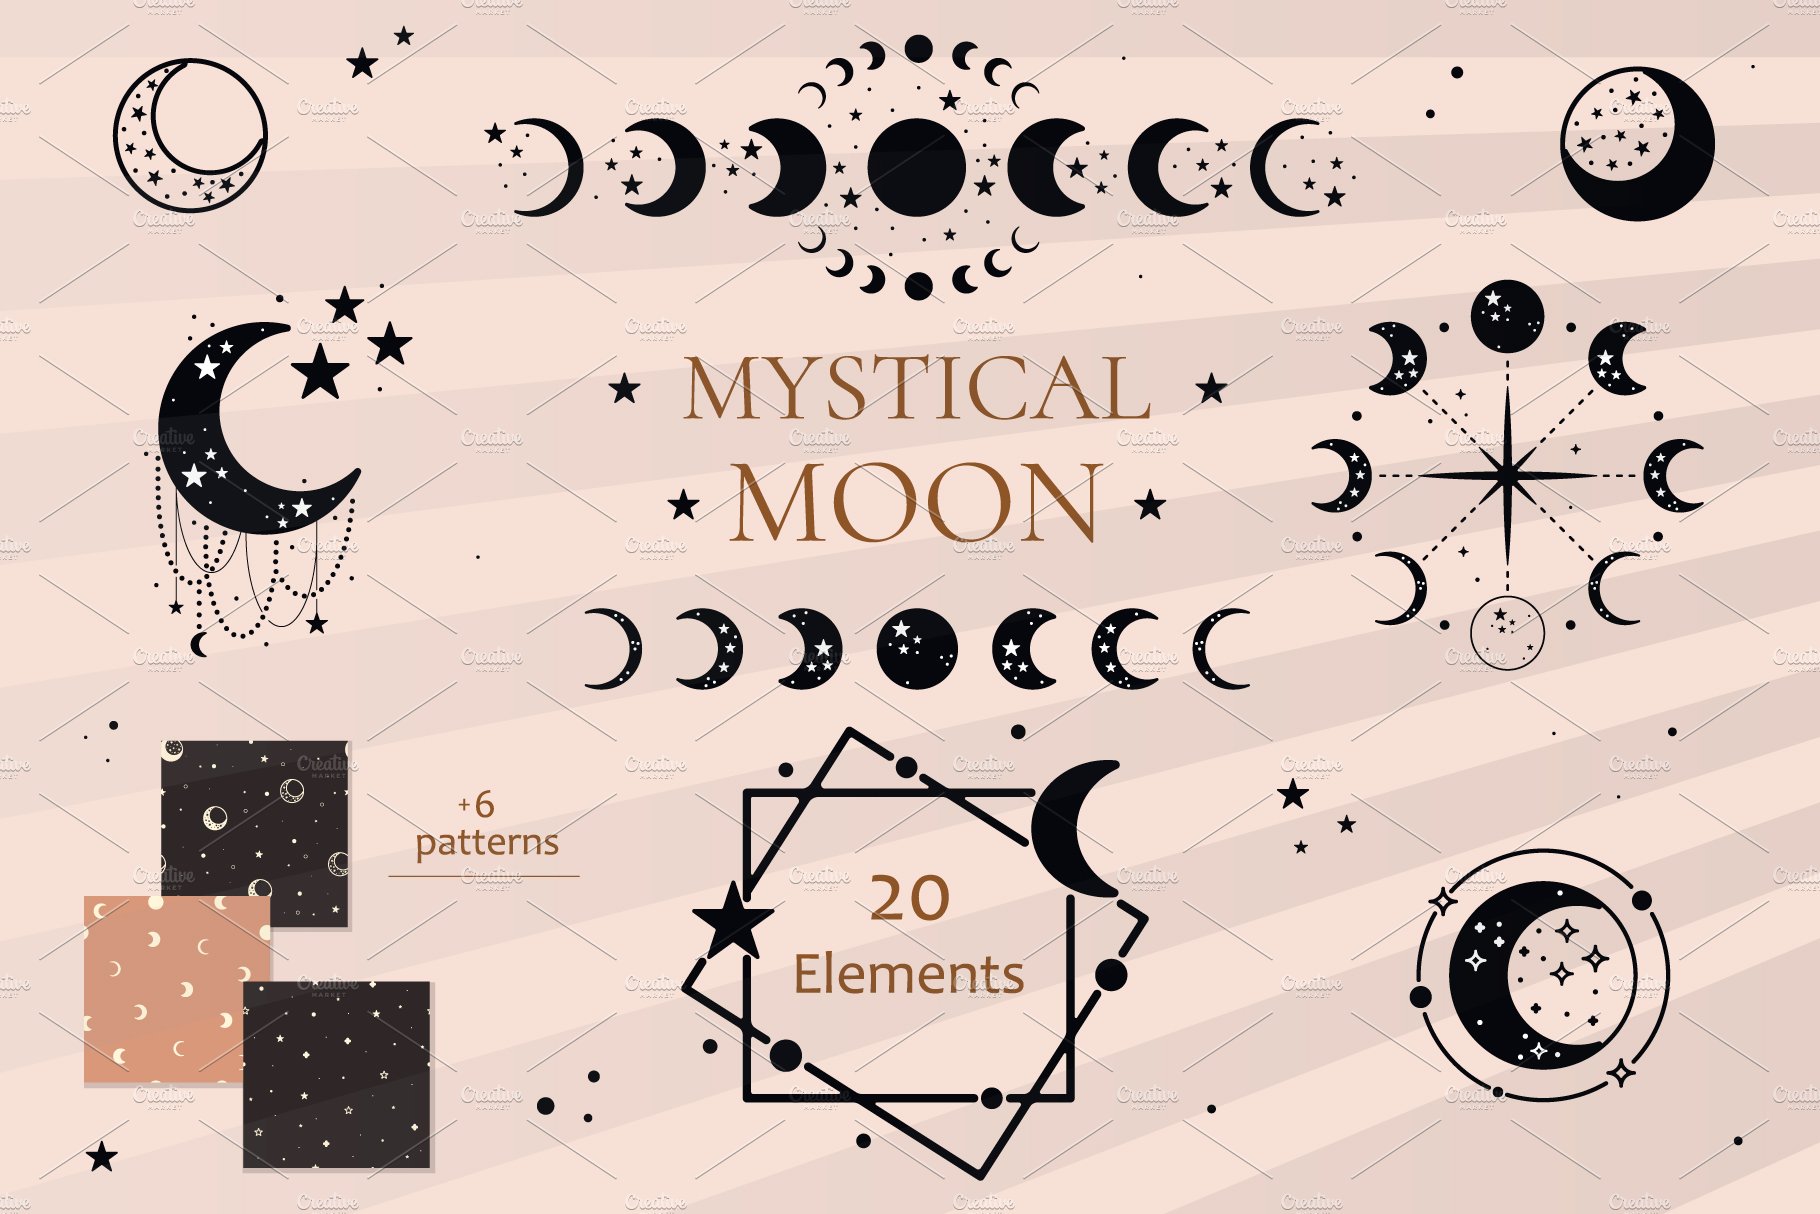 Mystical Moon and Stars cover image.